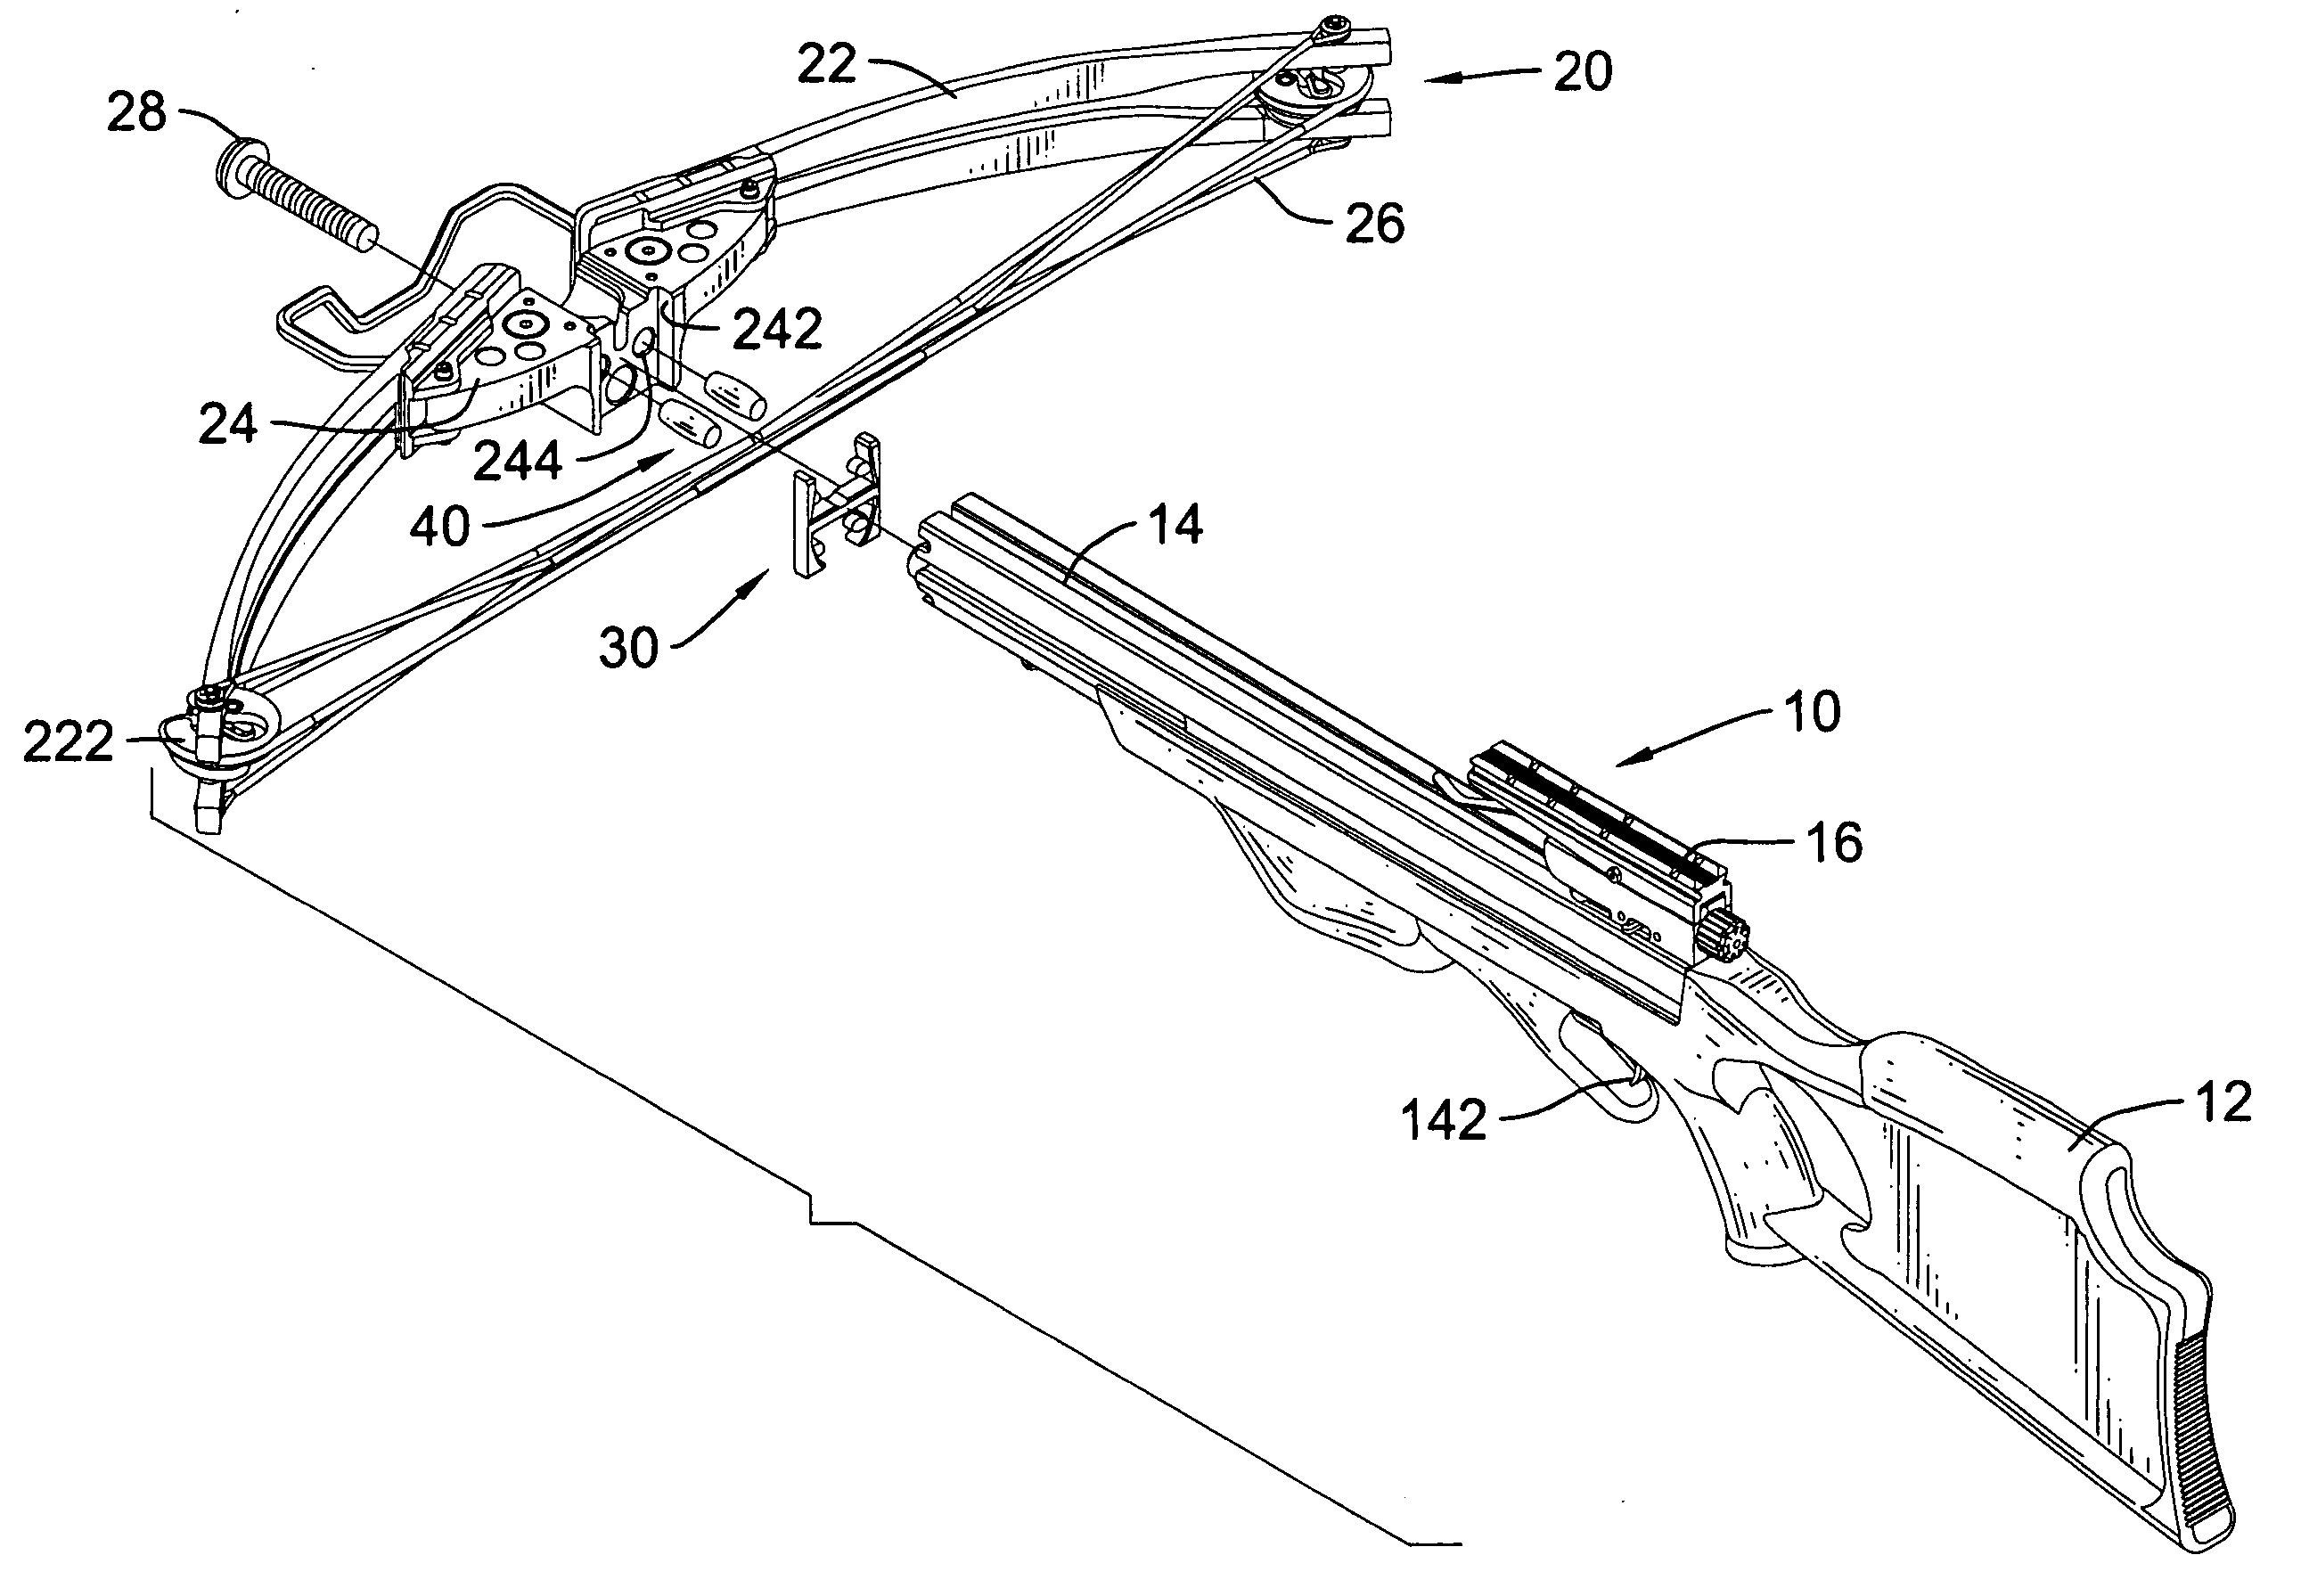 Crossbow with a vibration-damping device